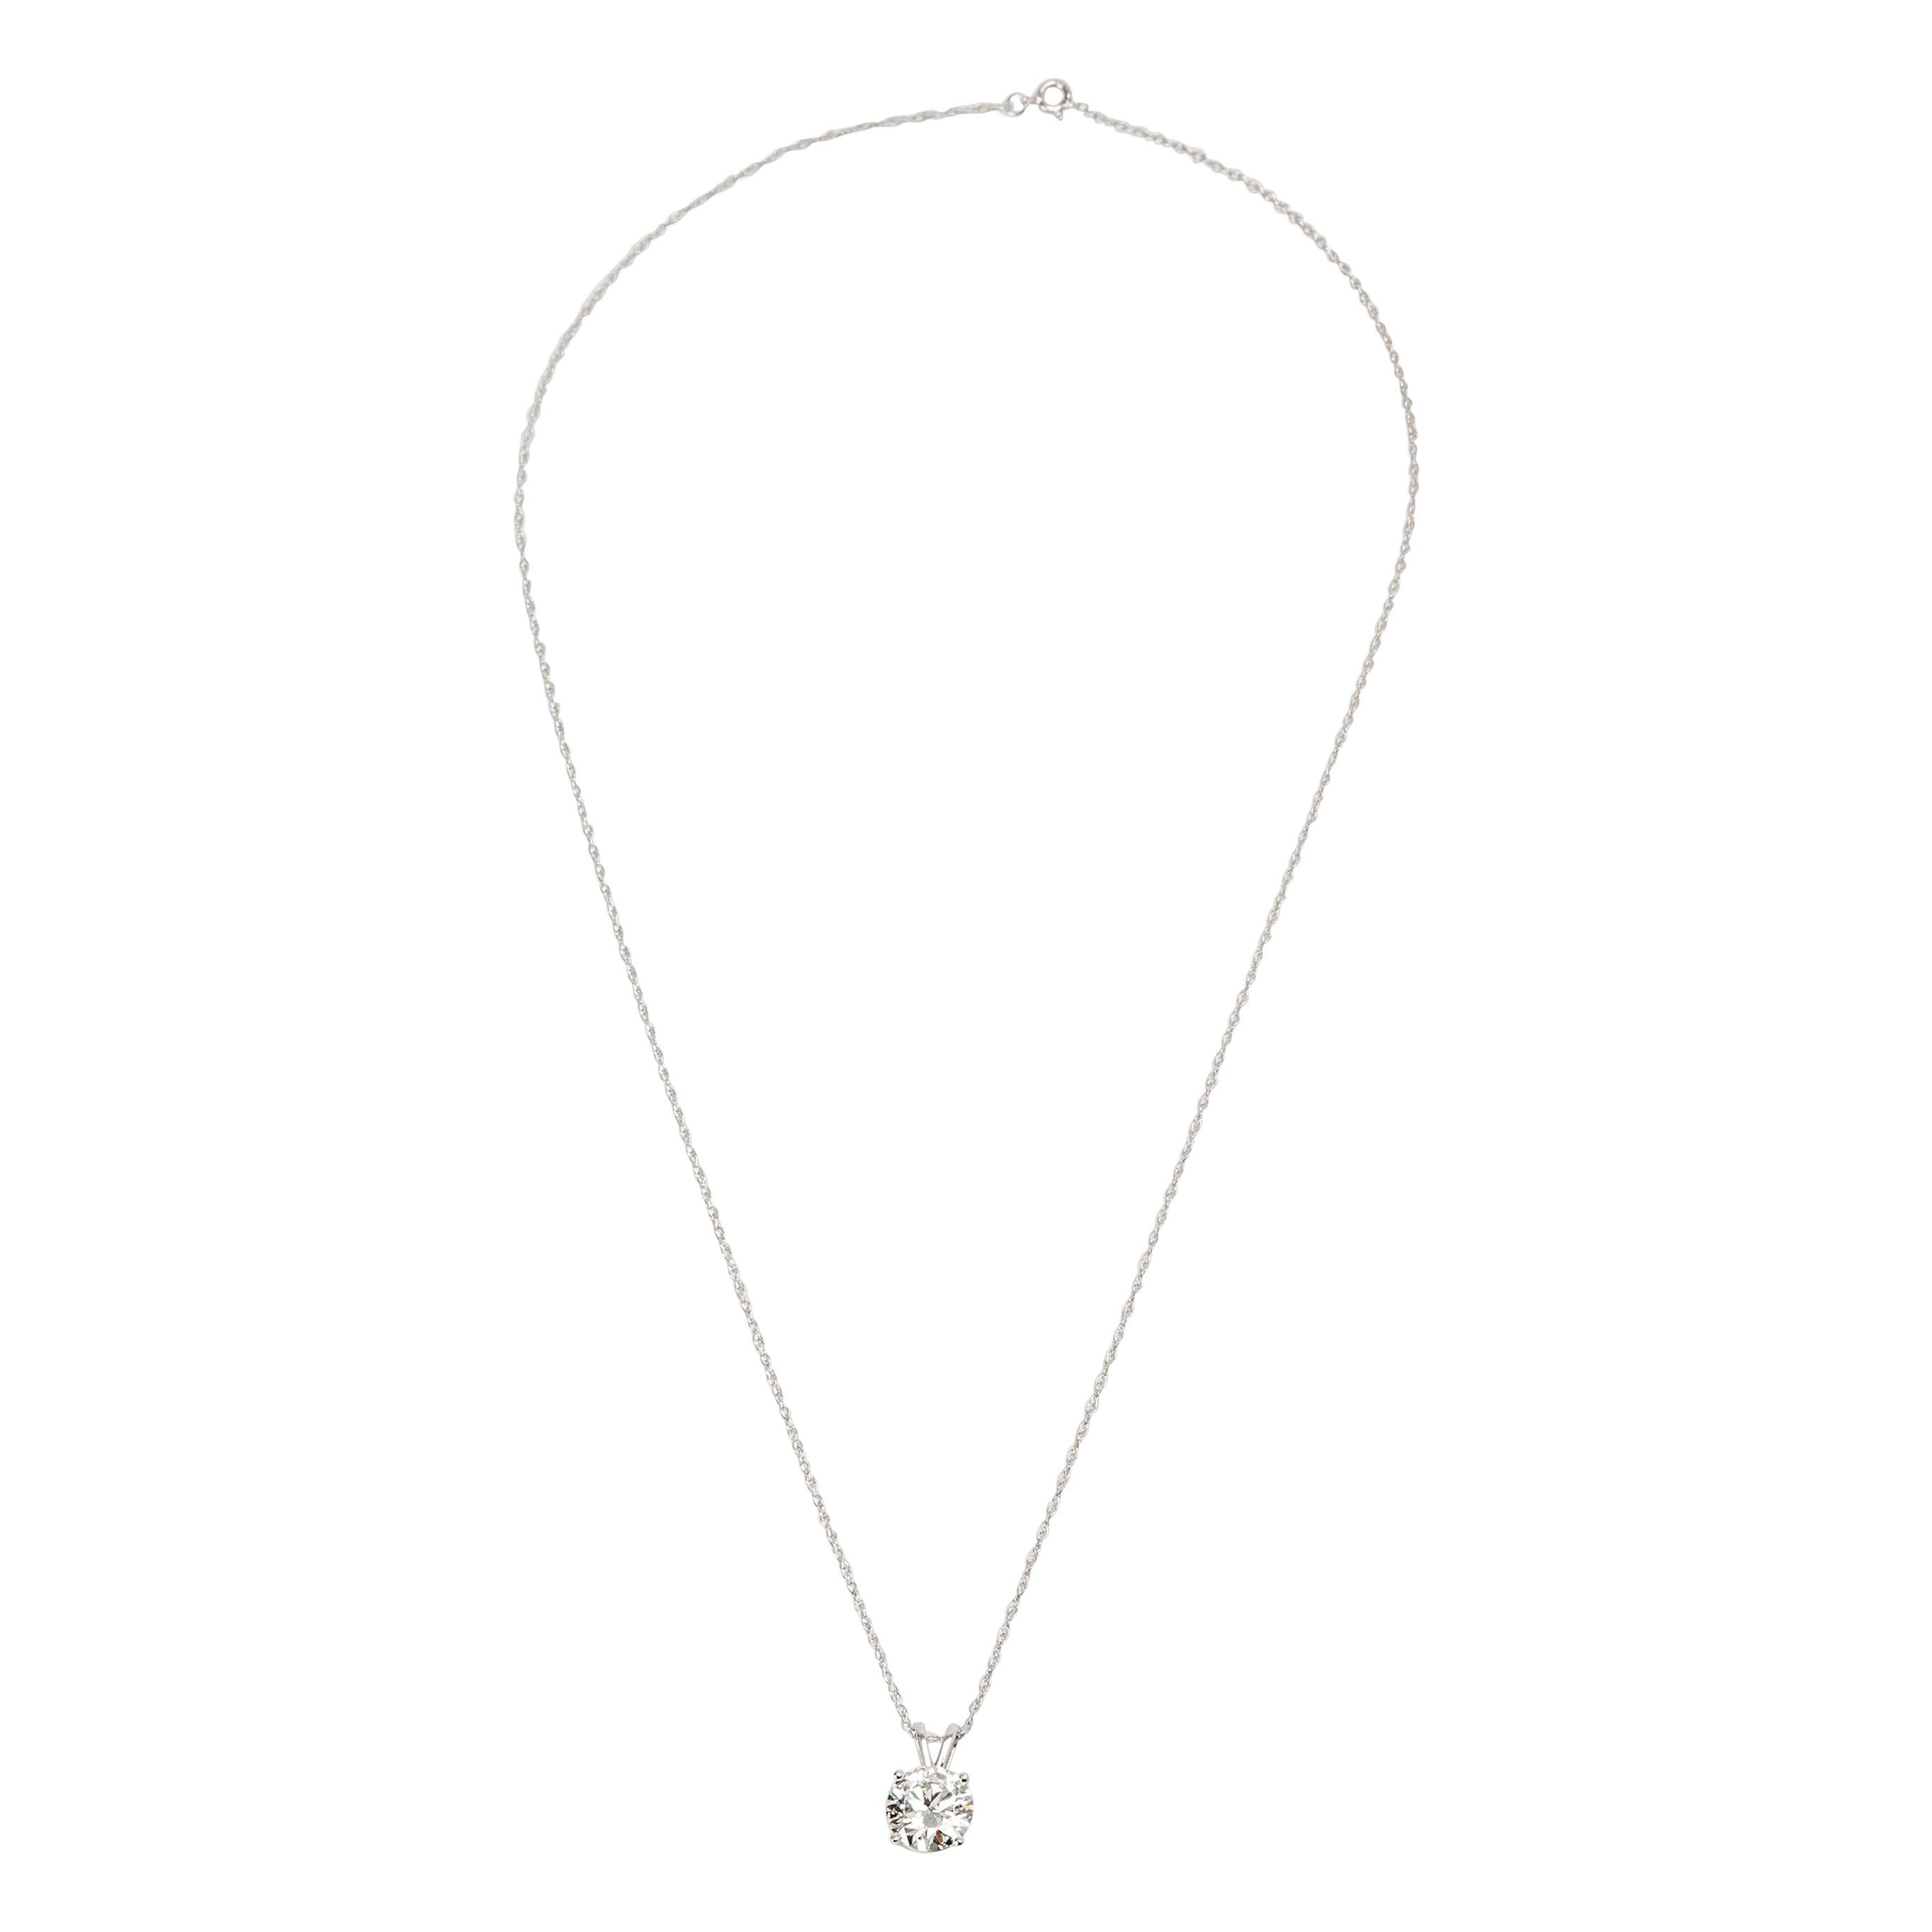 GIA Certified Diamond Solitaire Necklace in 14 Karat White Gold H SI1 1.91 Carat